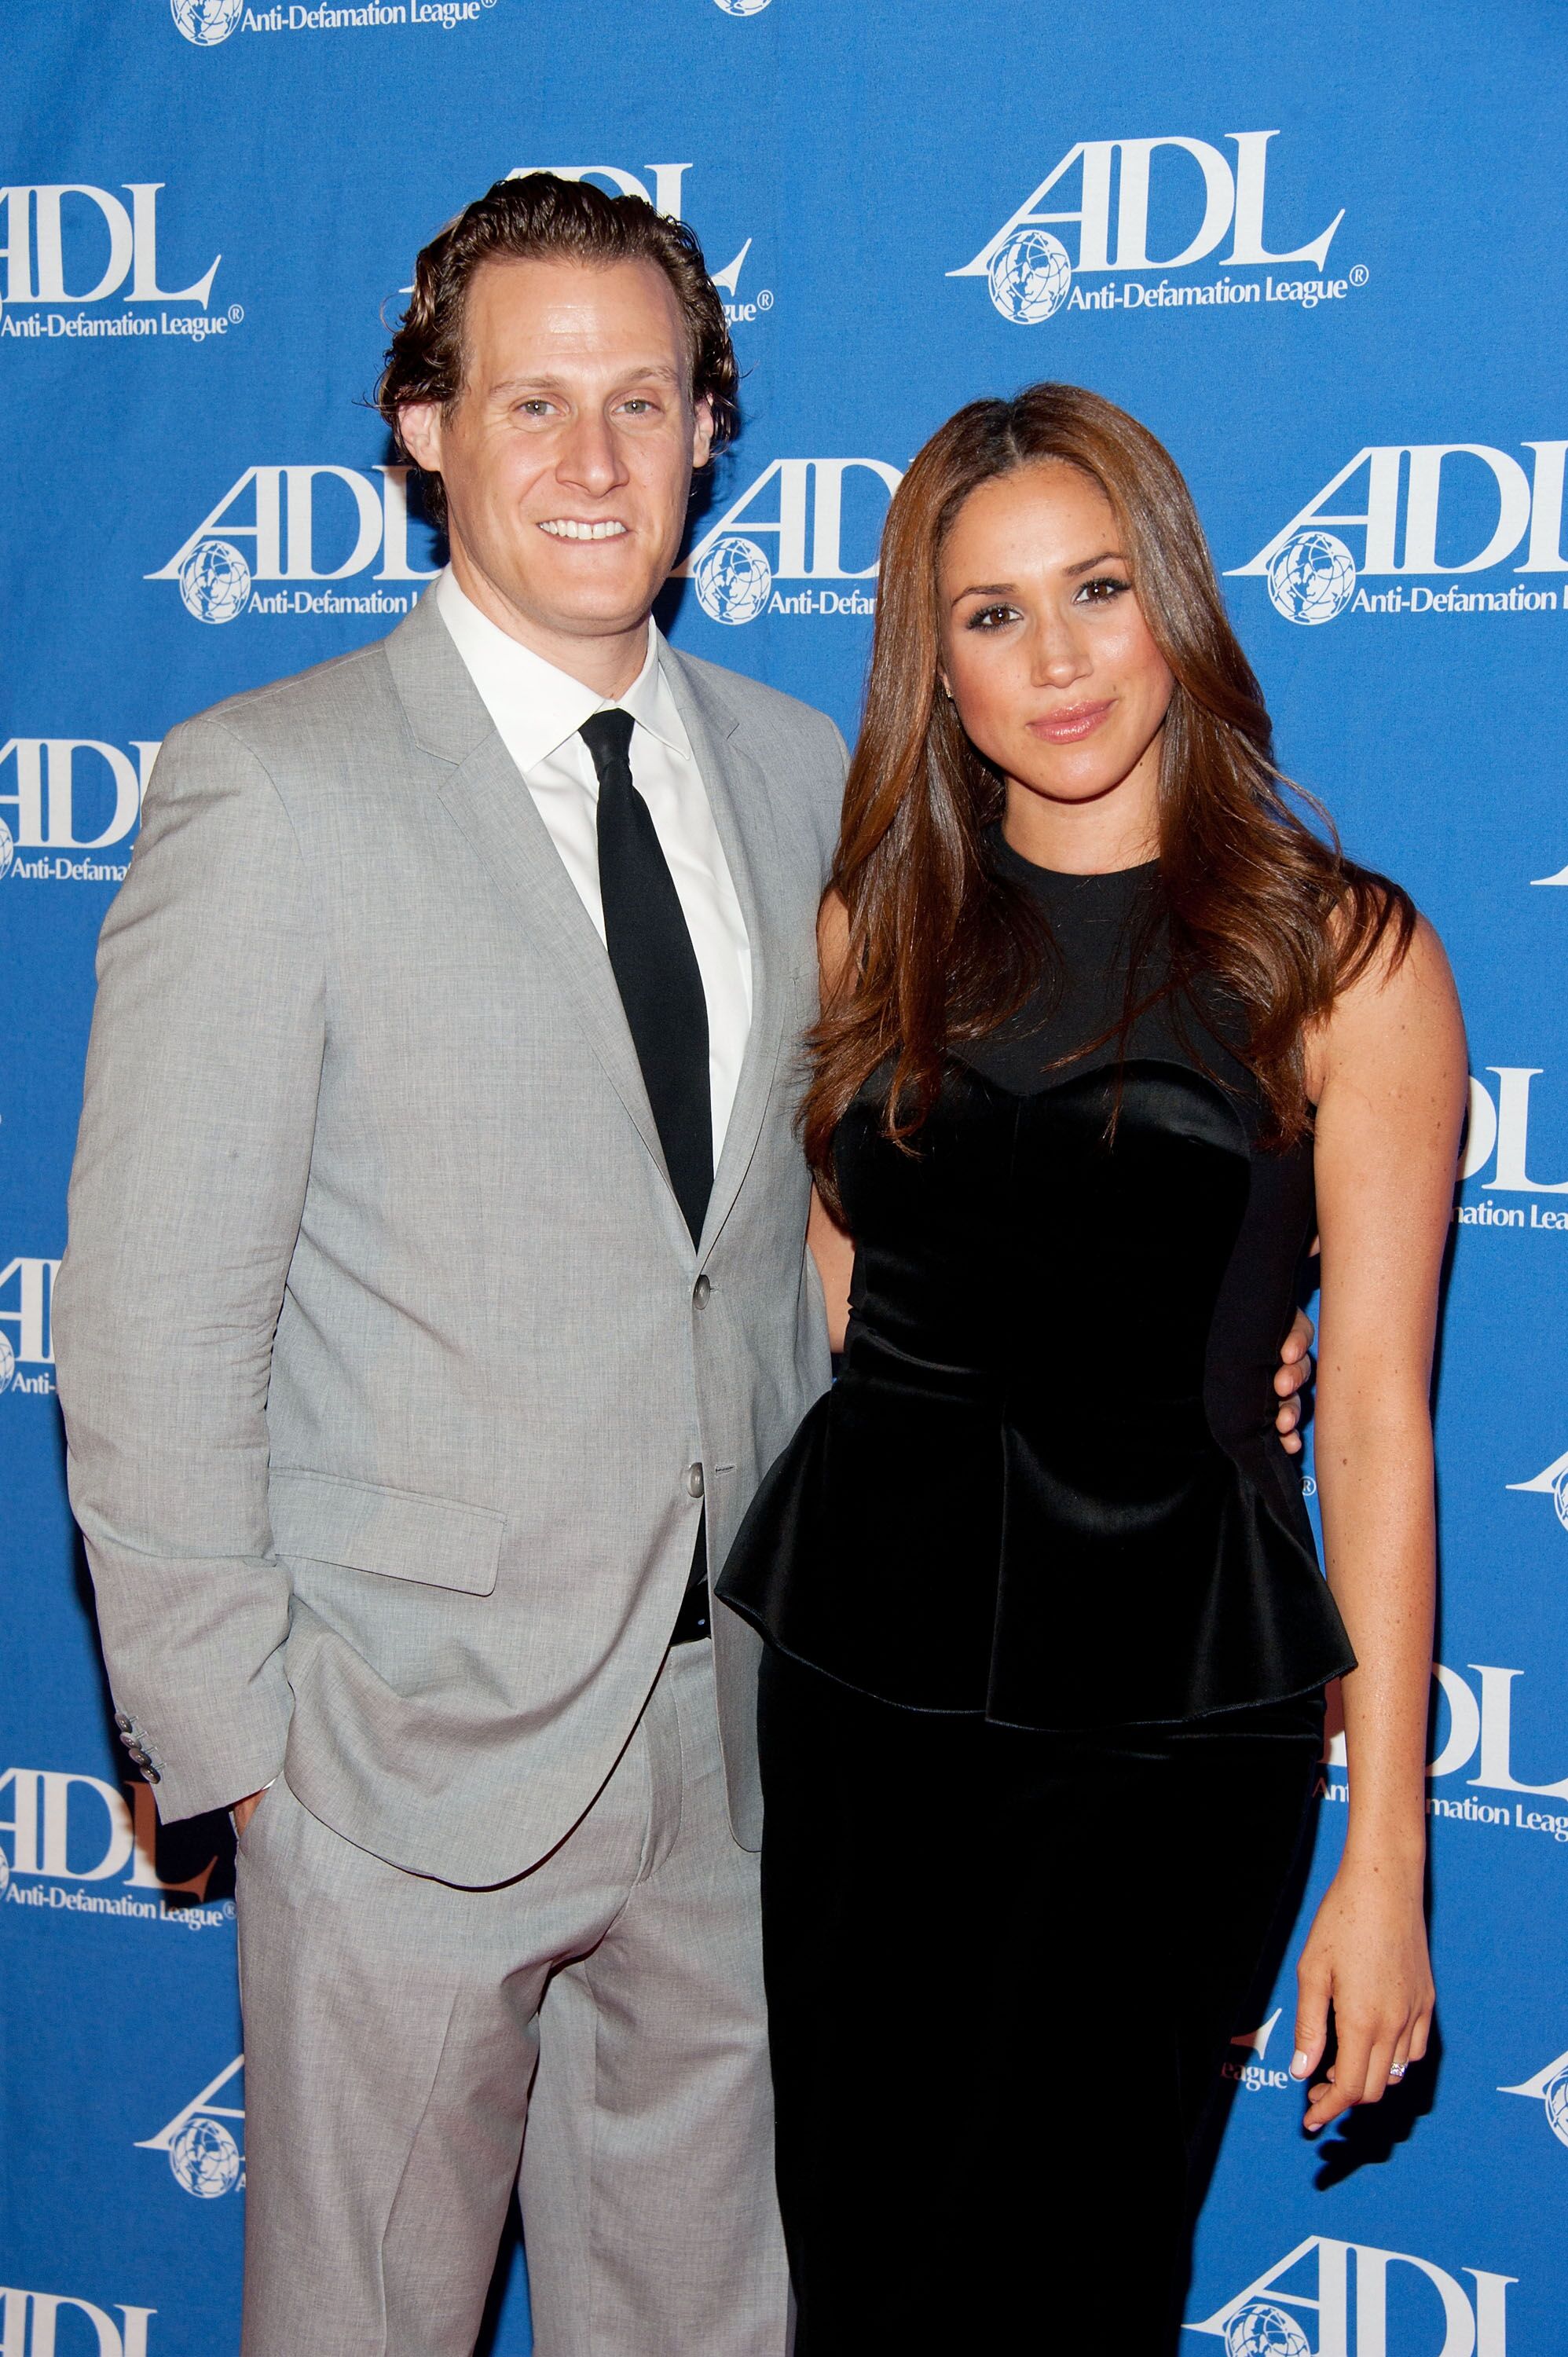 Trevor Engelson and Meghan Markle on October 11, 2011 in Beverly Hills, California | Photo: Getty Images